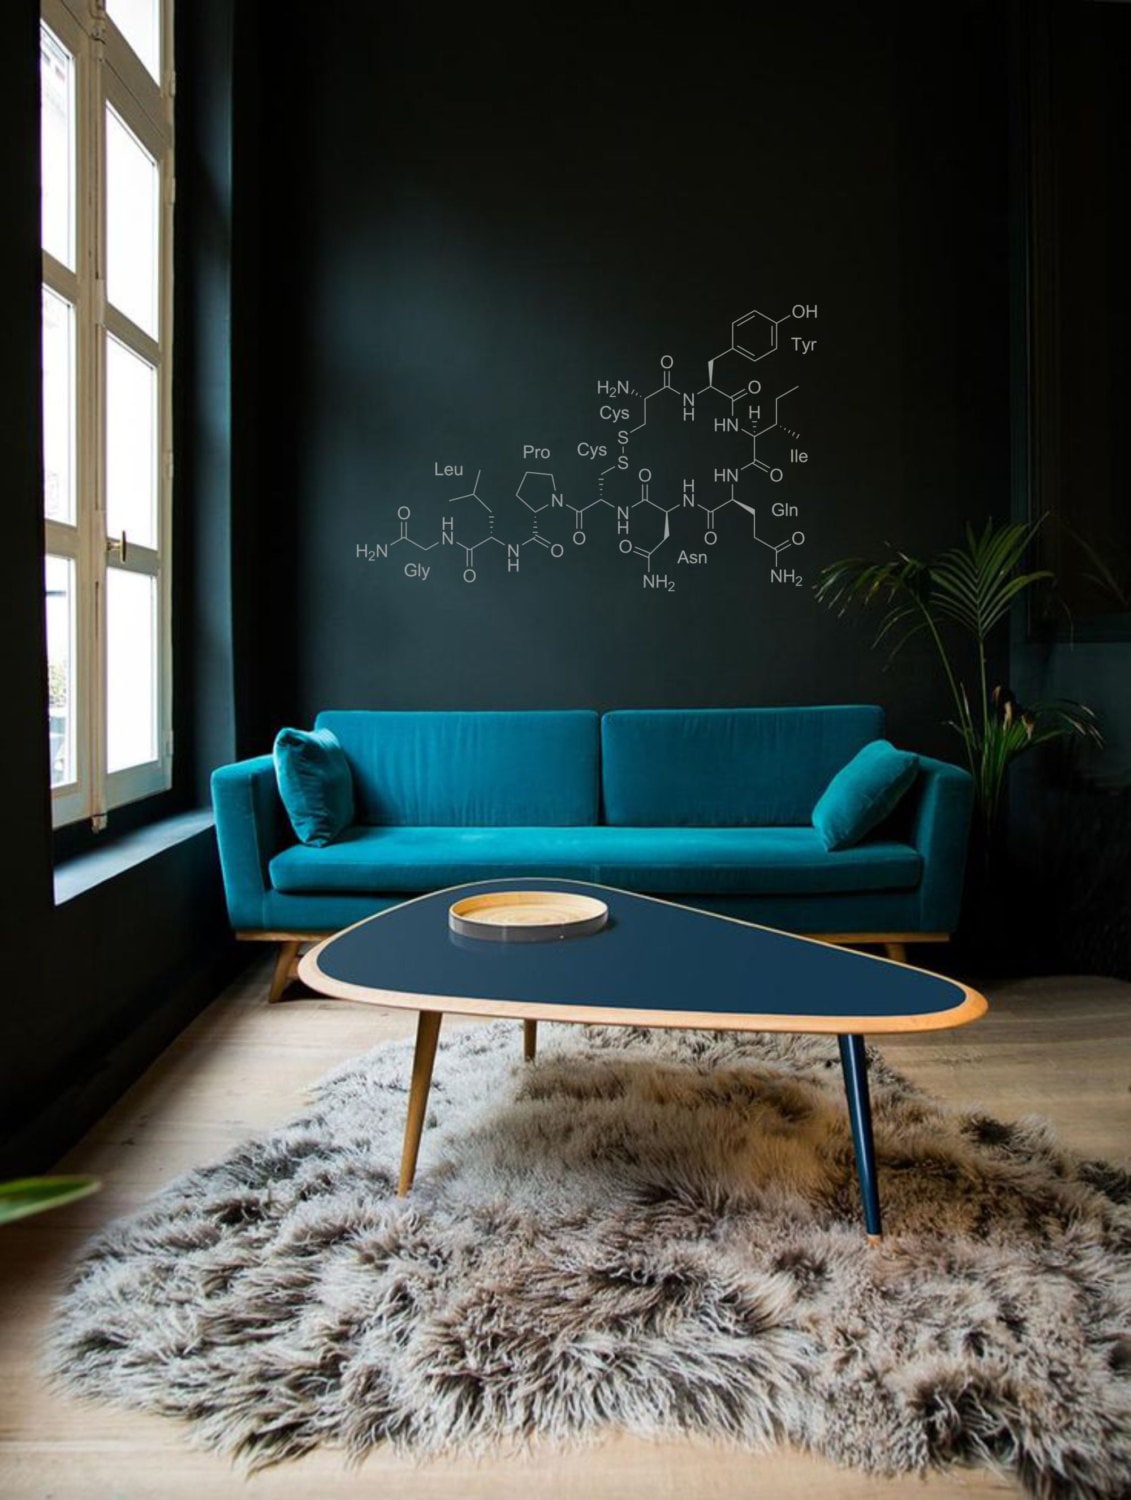 The Art of Science Molecule Wall Decal